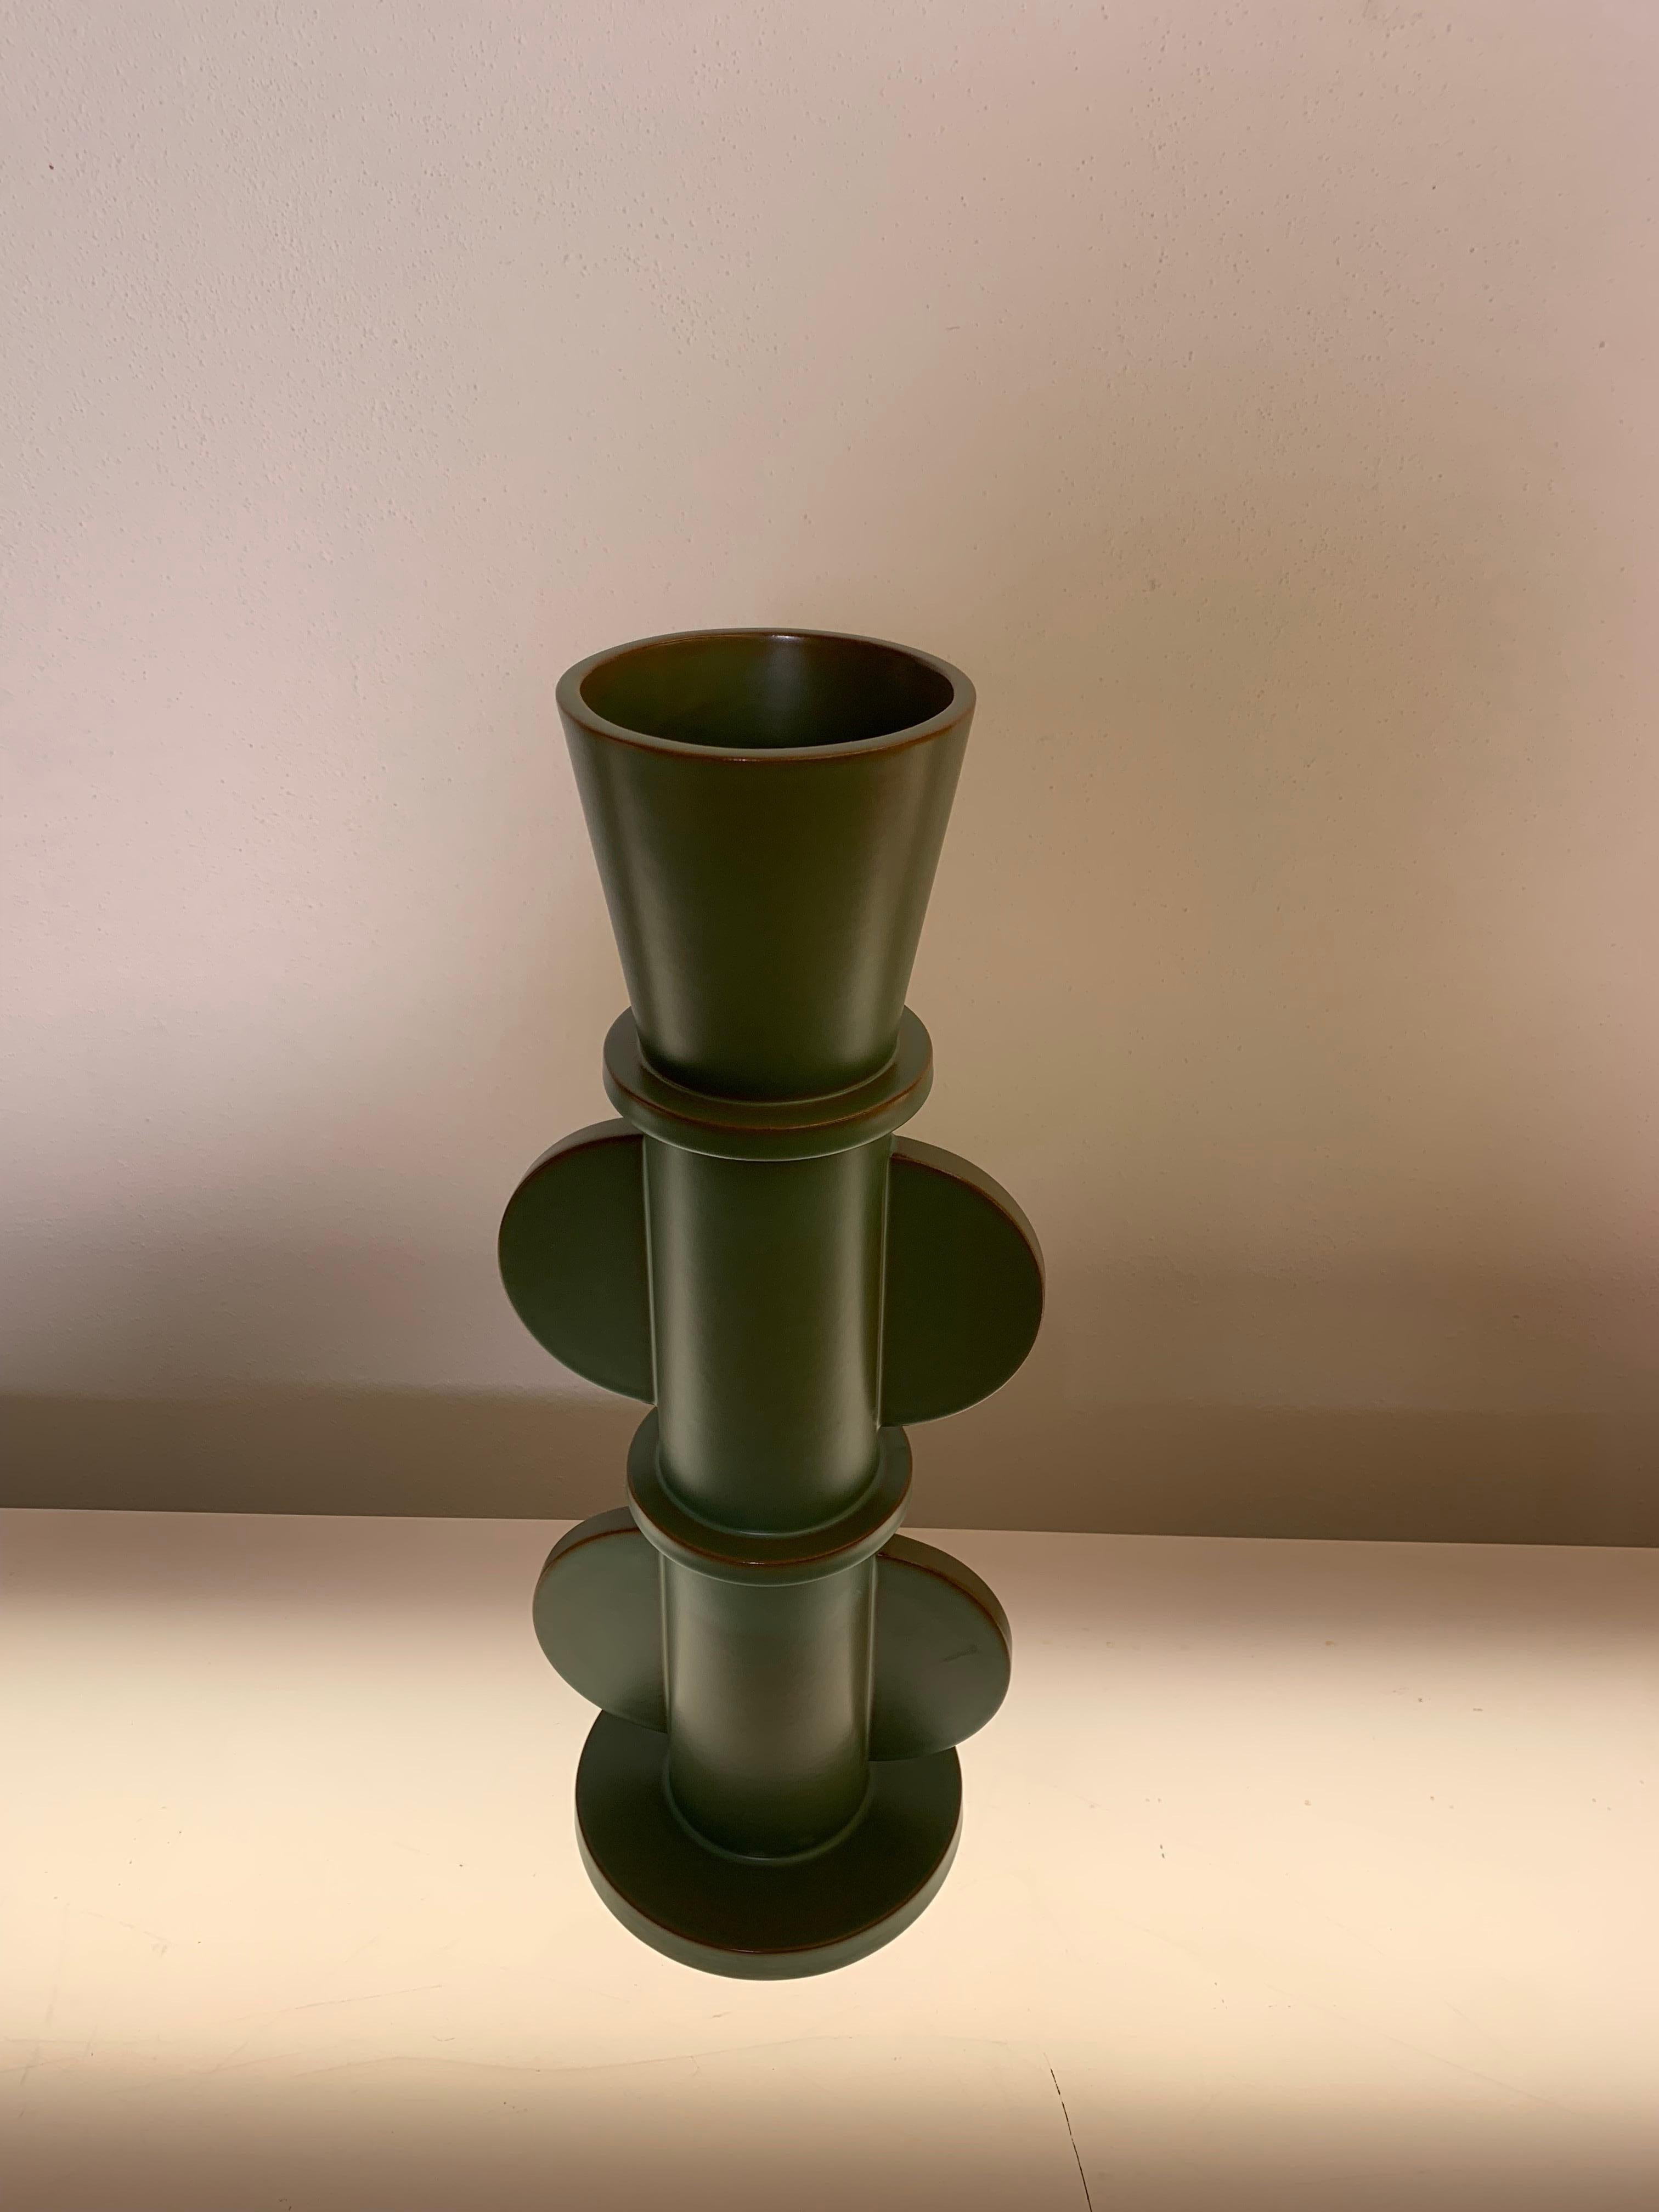 Contemporary Ceramic Vase by Nathalie Du Pasquier for Alessio Sarri Editions, Italy For Sale